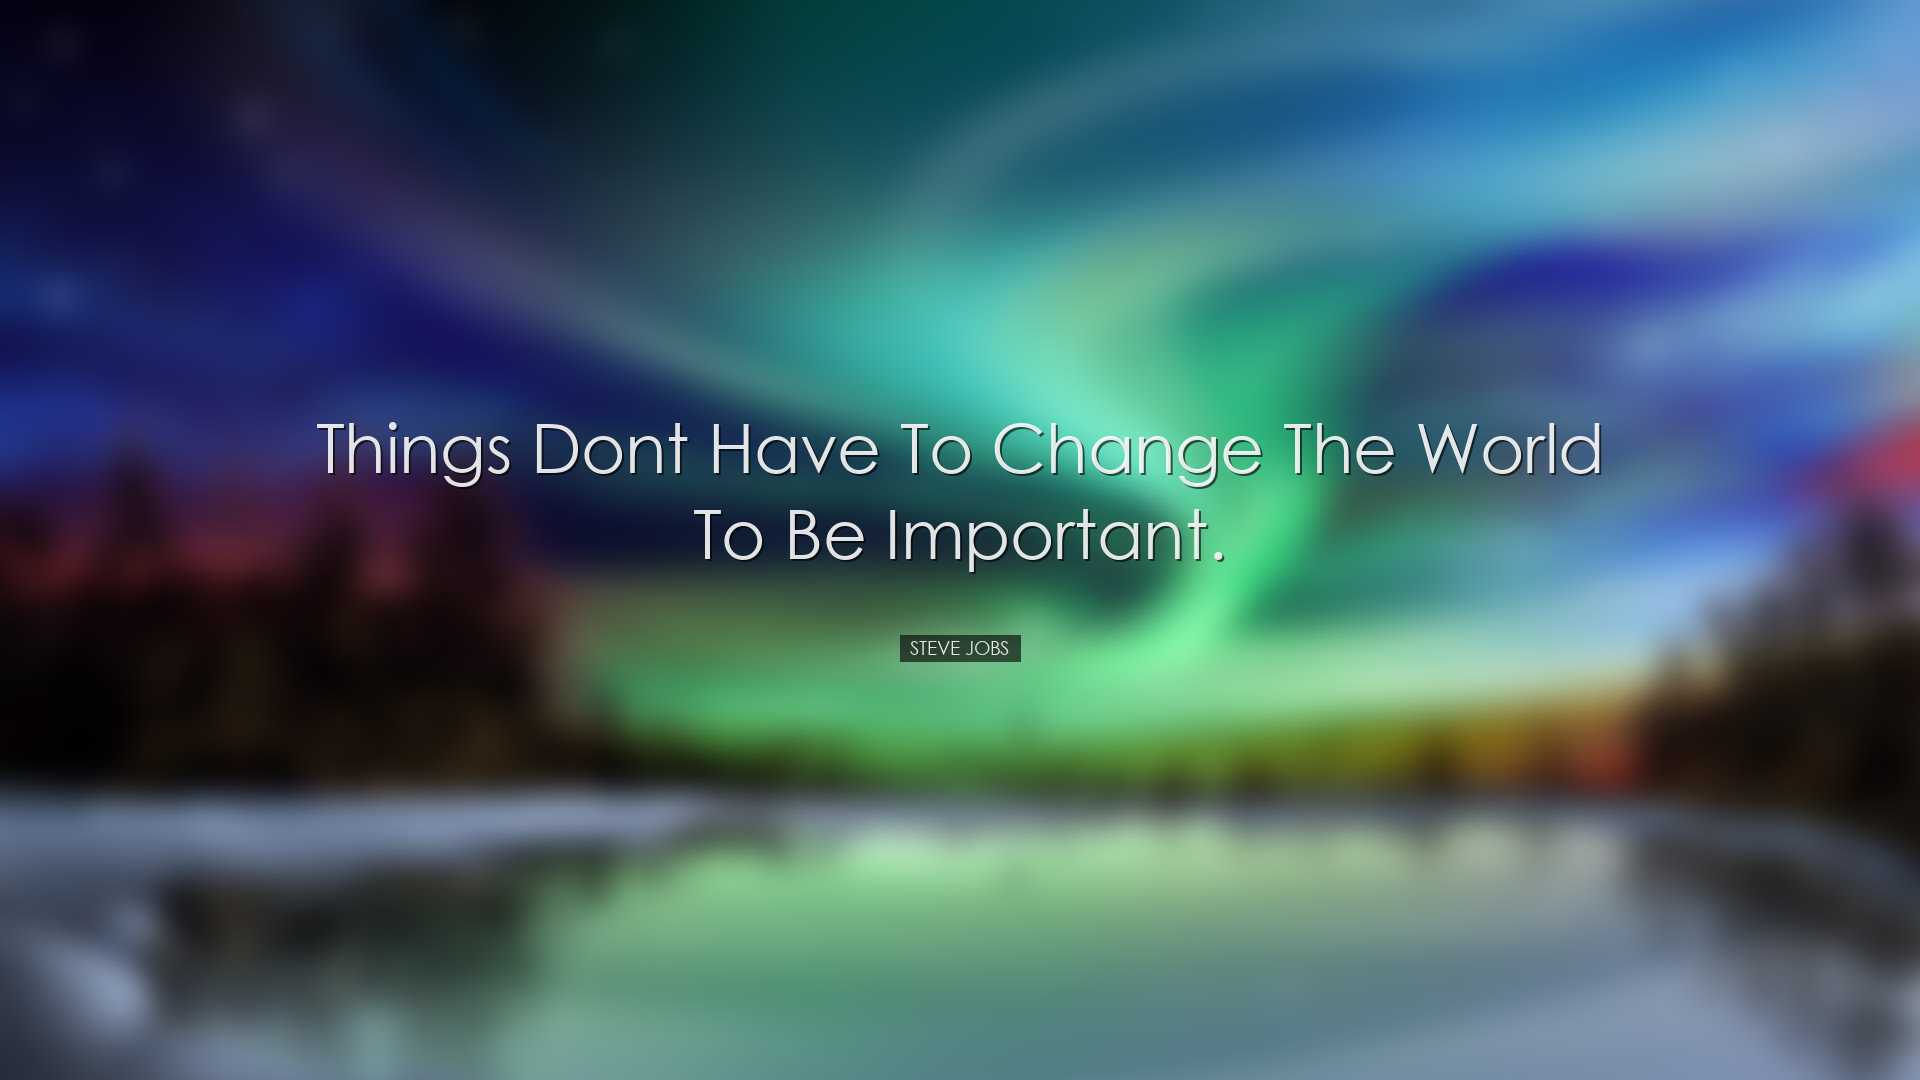 Things dont have to change the world to be important. - Steve Jobs